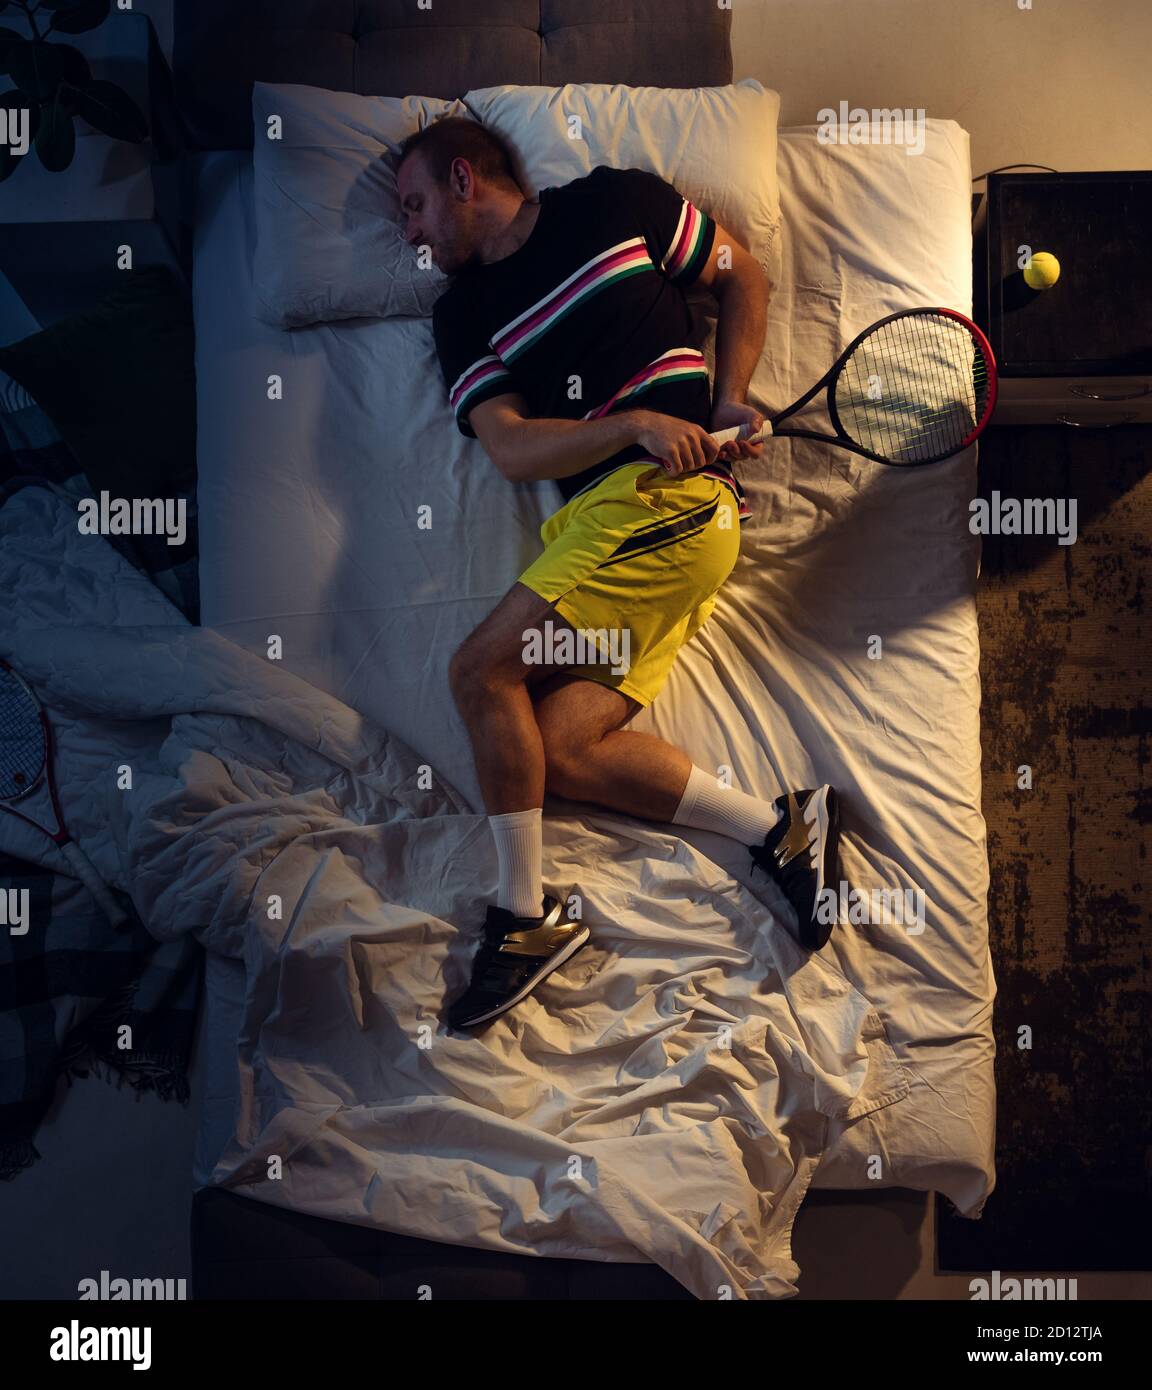 In love. Top view of young professional tennis player sleeping at his  bedroom in sportwear with racket. Loving his sport even more than comfort,  watching match even if resting. Action, motion, humor